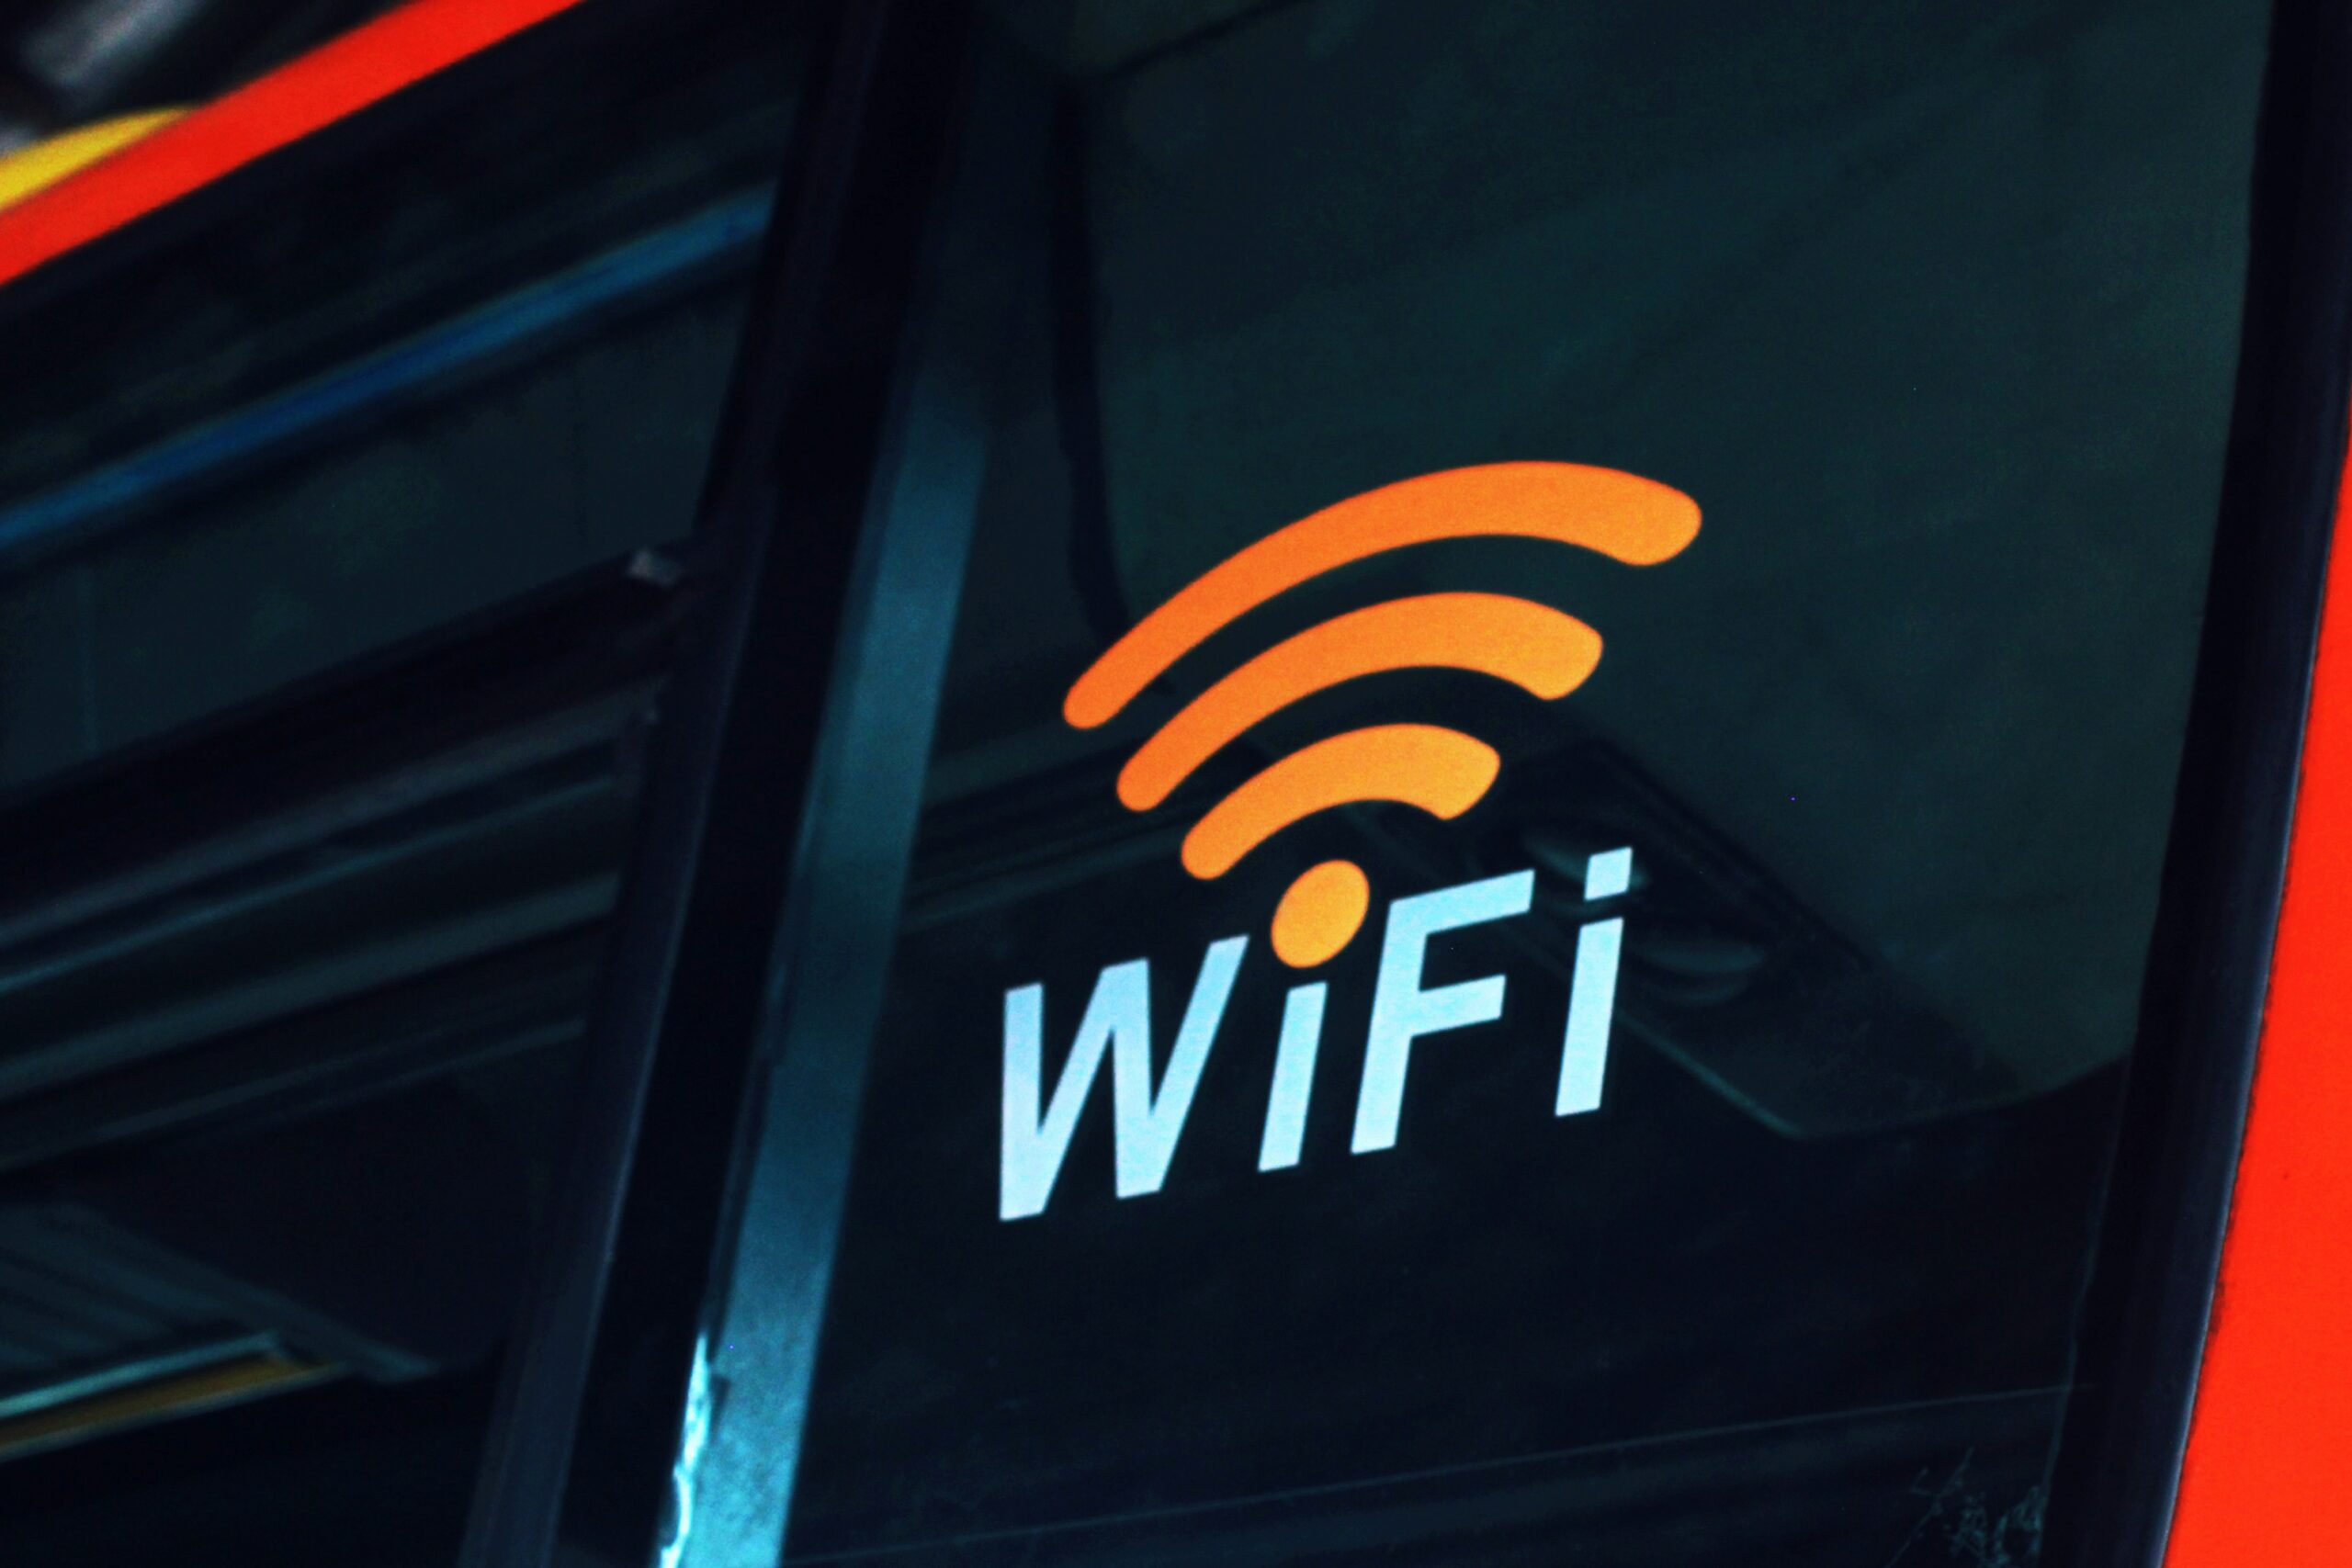 A Wi-Fi logo connecting to a PC displayed on a window.